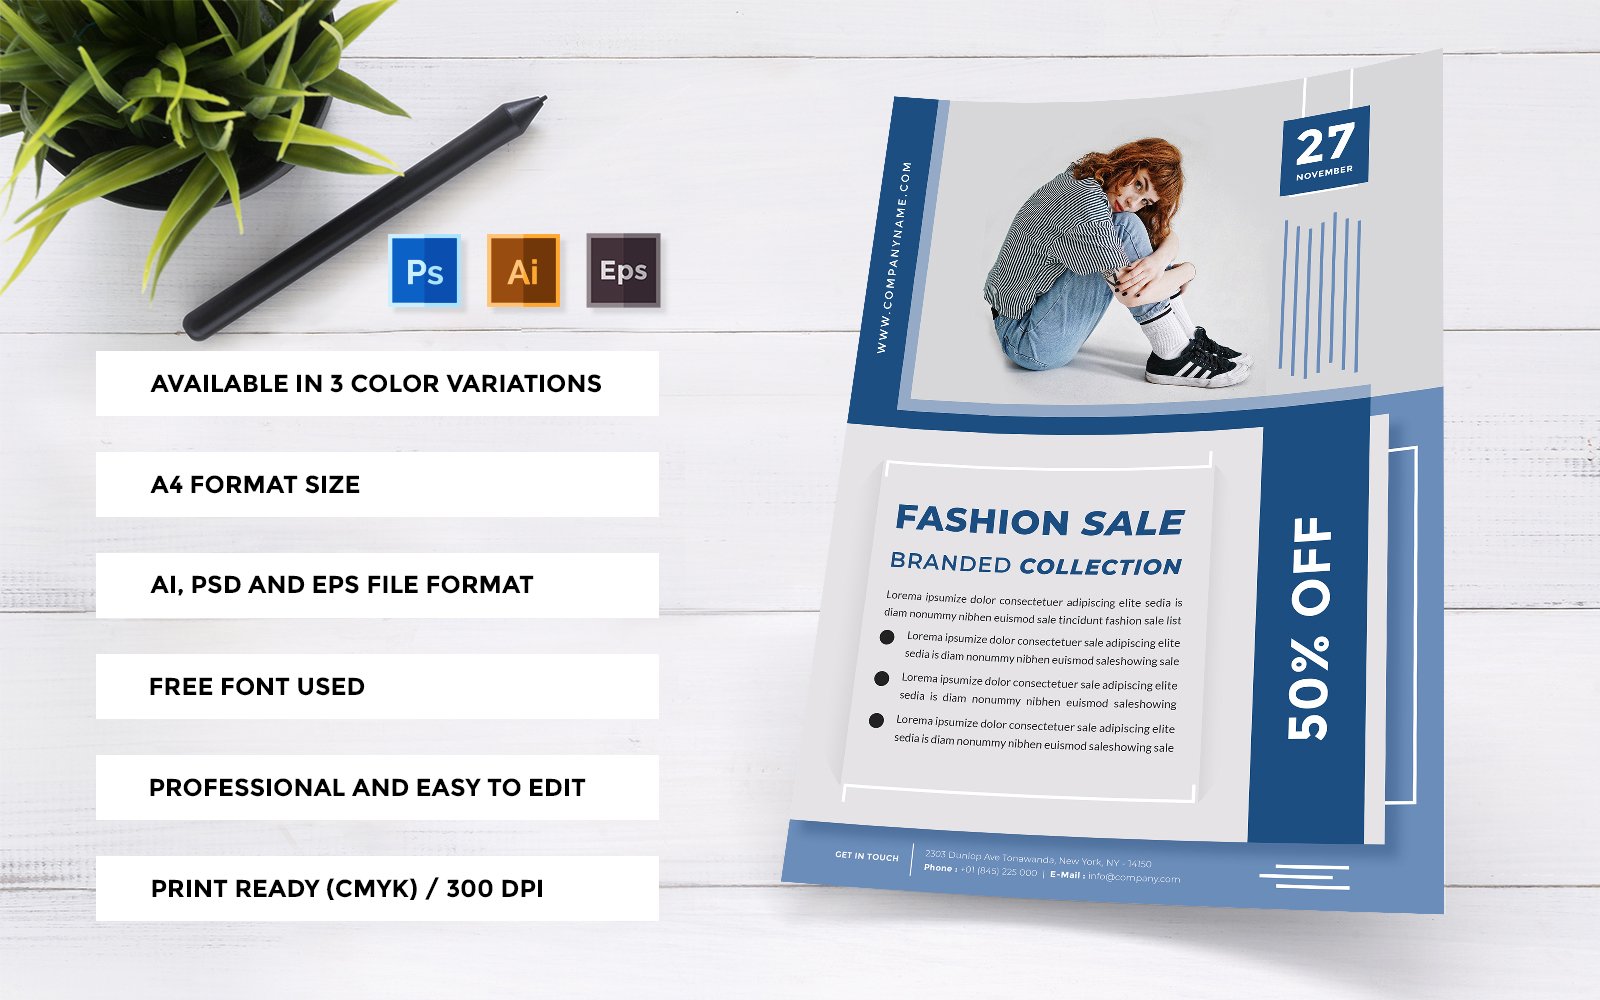 Fashion Sale Branded Collection – Minimalist Clean Flyer